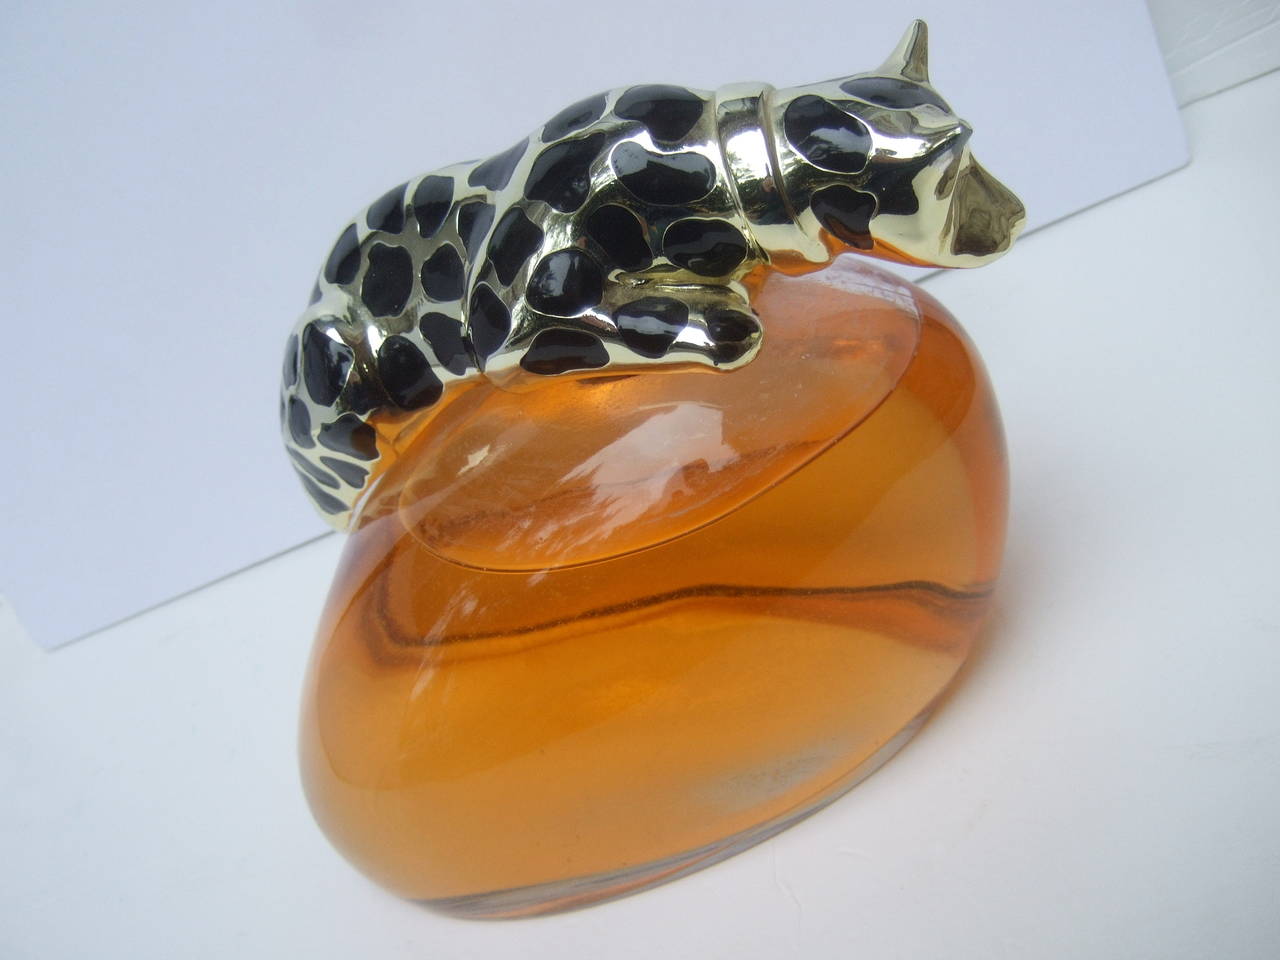 Women's Opulent Large Factice Perfume Display Bottle with Panther Stopper